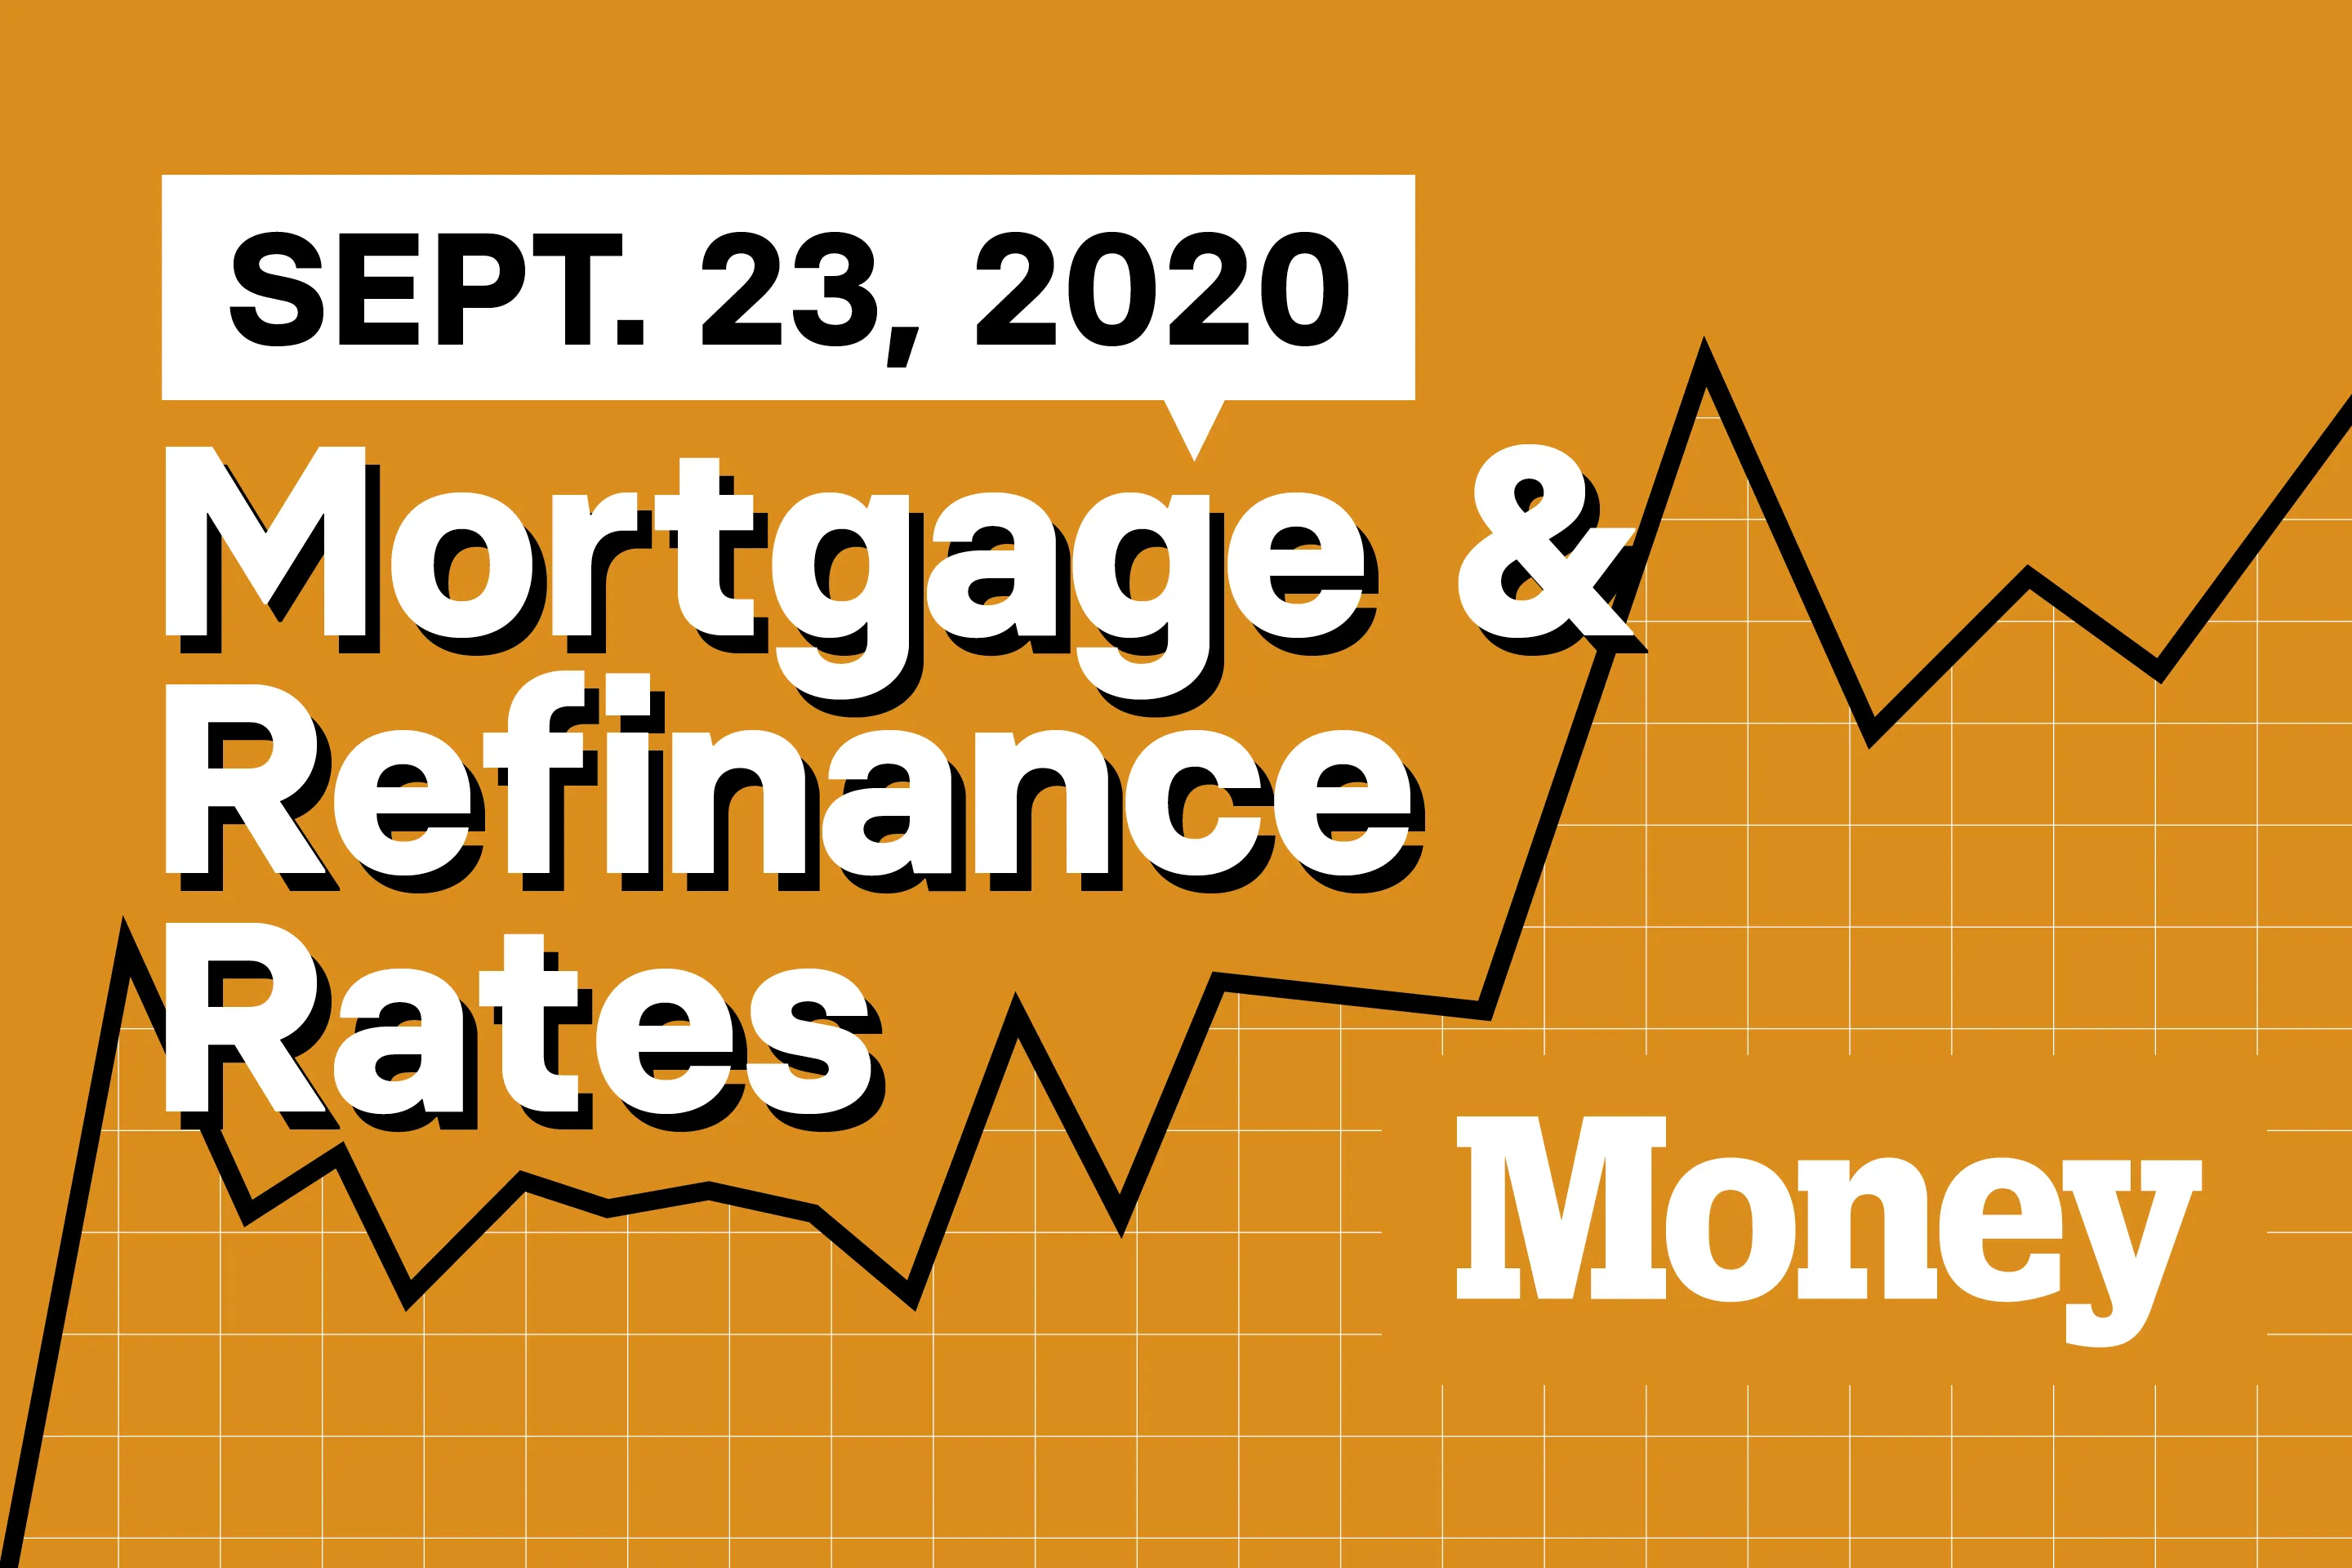 Here Are Today's Best Mortgage & Refinance Rates for September 23, 2020